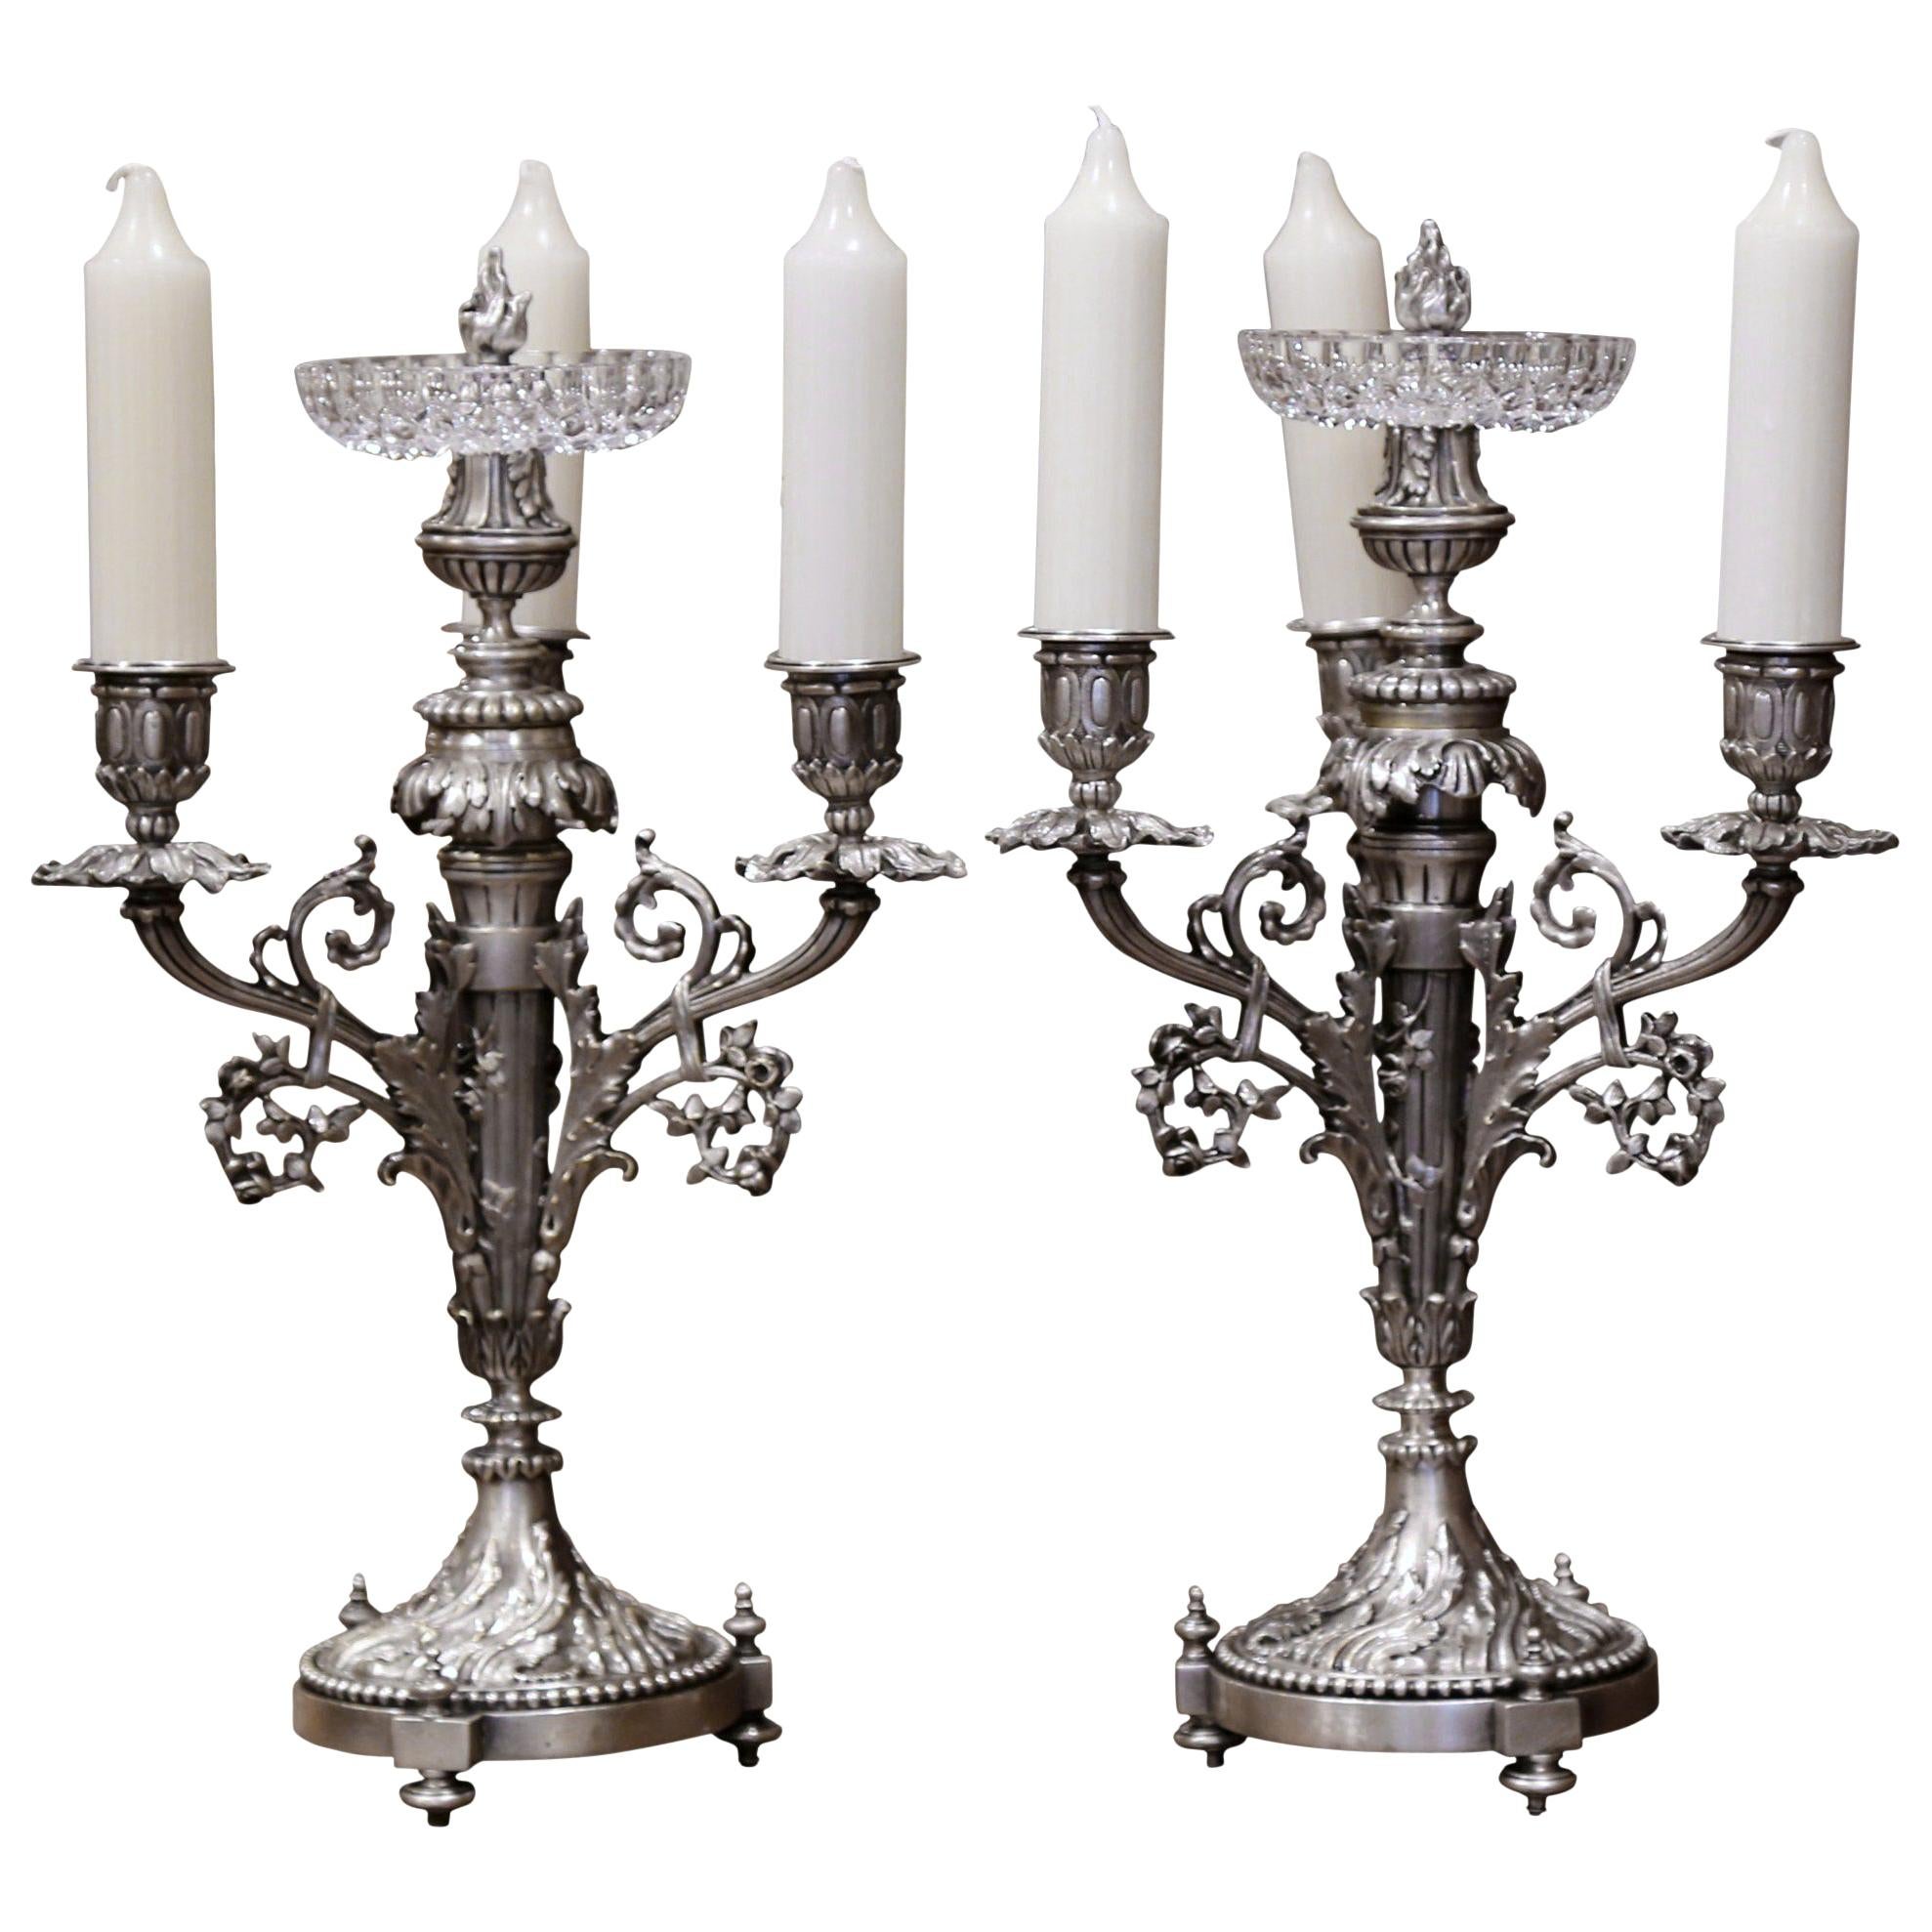 Pair of 19th Century French Silvered Bronze and Crystal Three-Light Candelabras